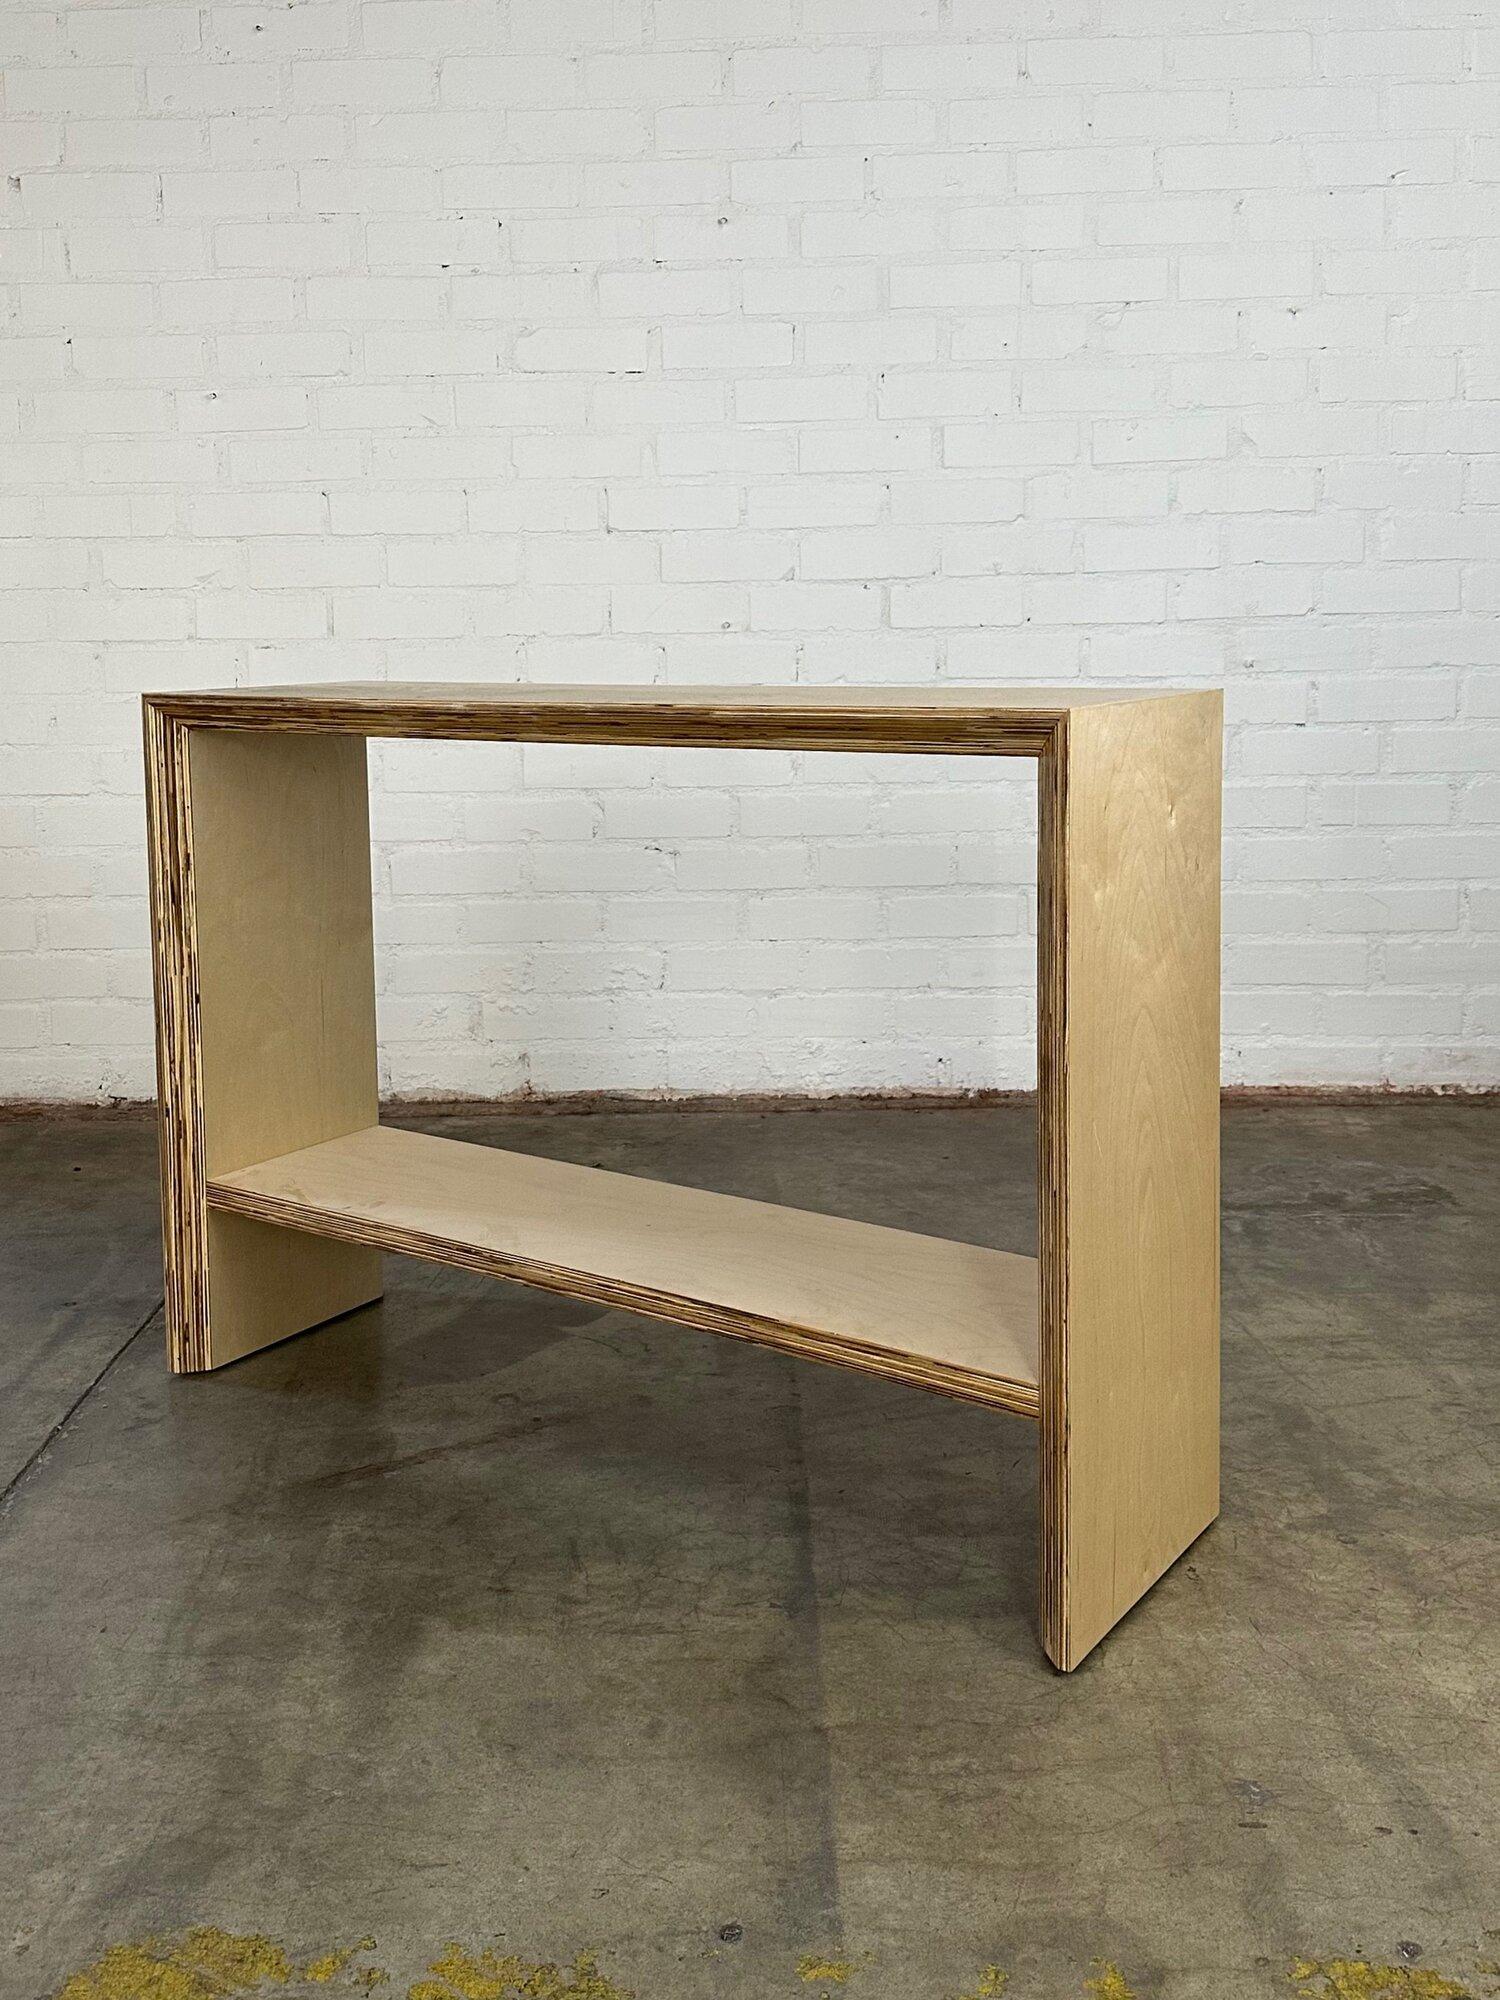 W50 D15 H35

Handcrafted in house this minimal Maple plywood console is made to order. Item features slight angled sides and exposed plywood sides to add a flair of detail. Item is structurally sound and super sturdy. Price is for the floor model